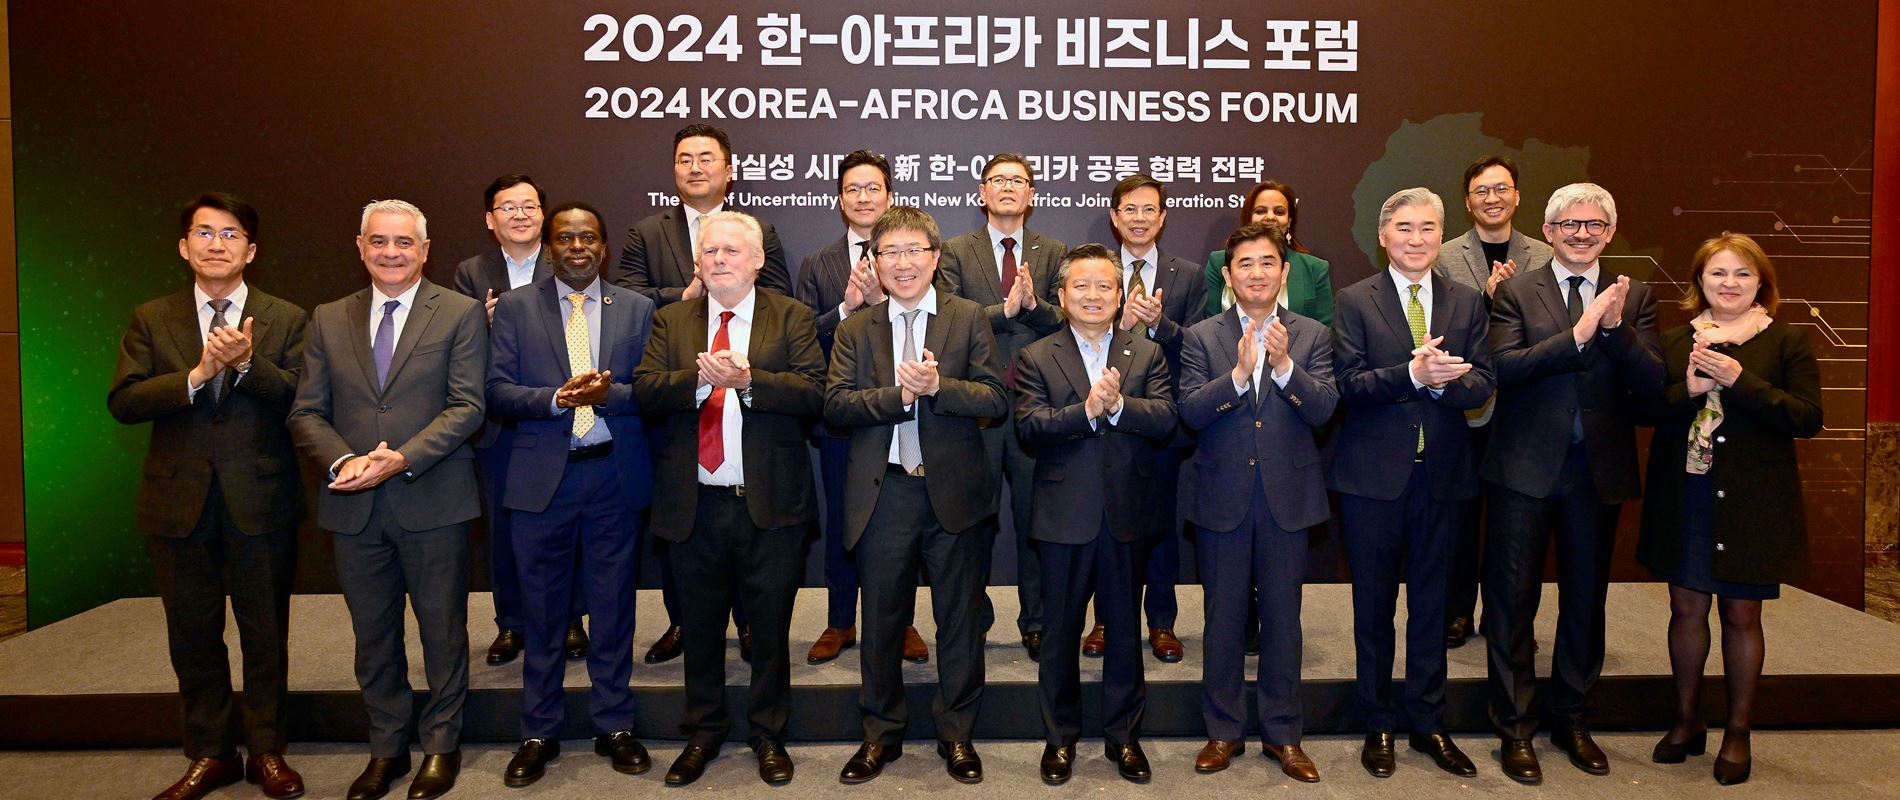 Hyundai Motor Group Co Hosts 2024 Korea Africa Business Forum to Foster Partnerships for Sustainable Development